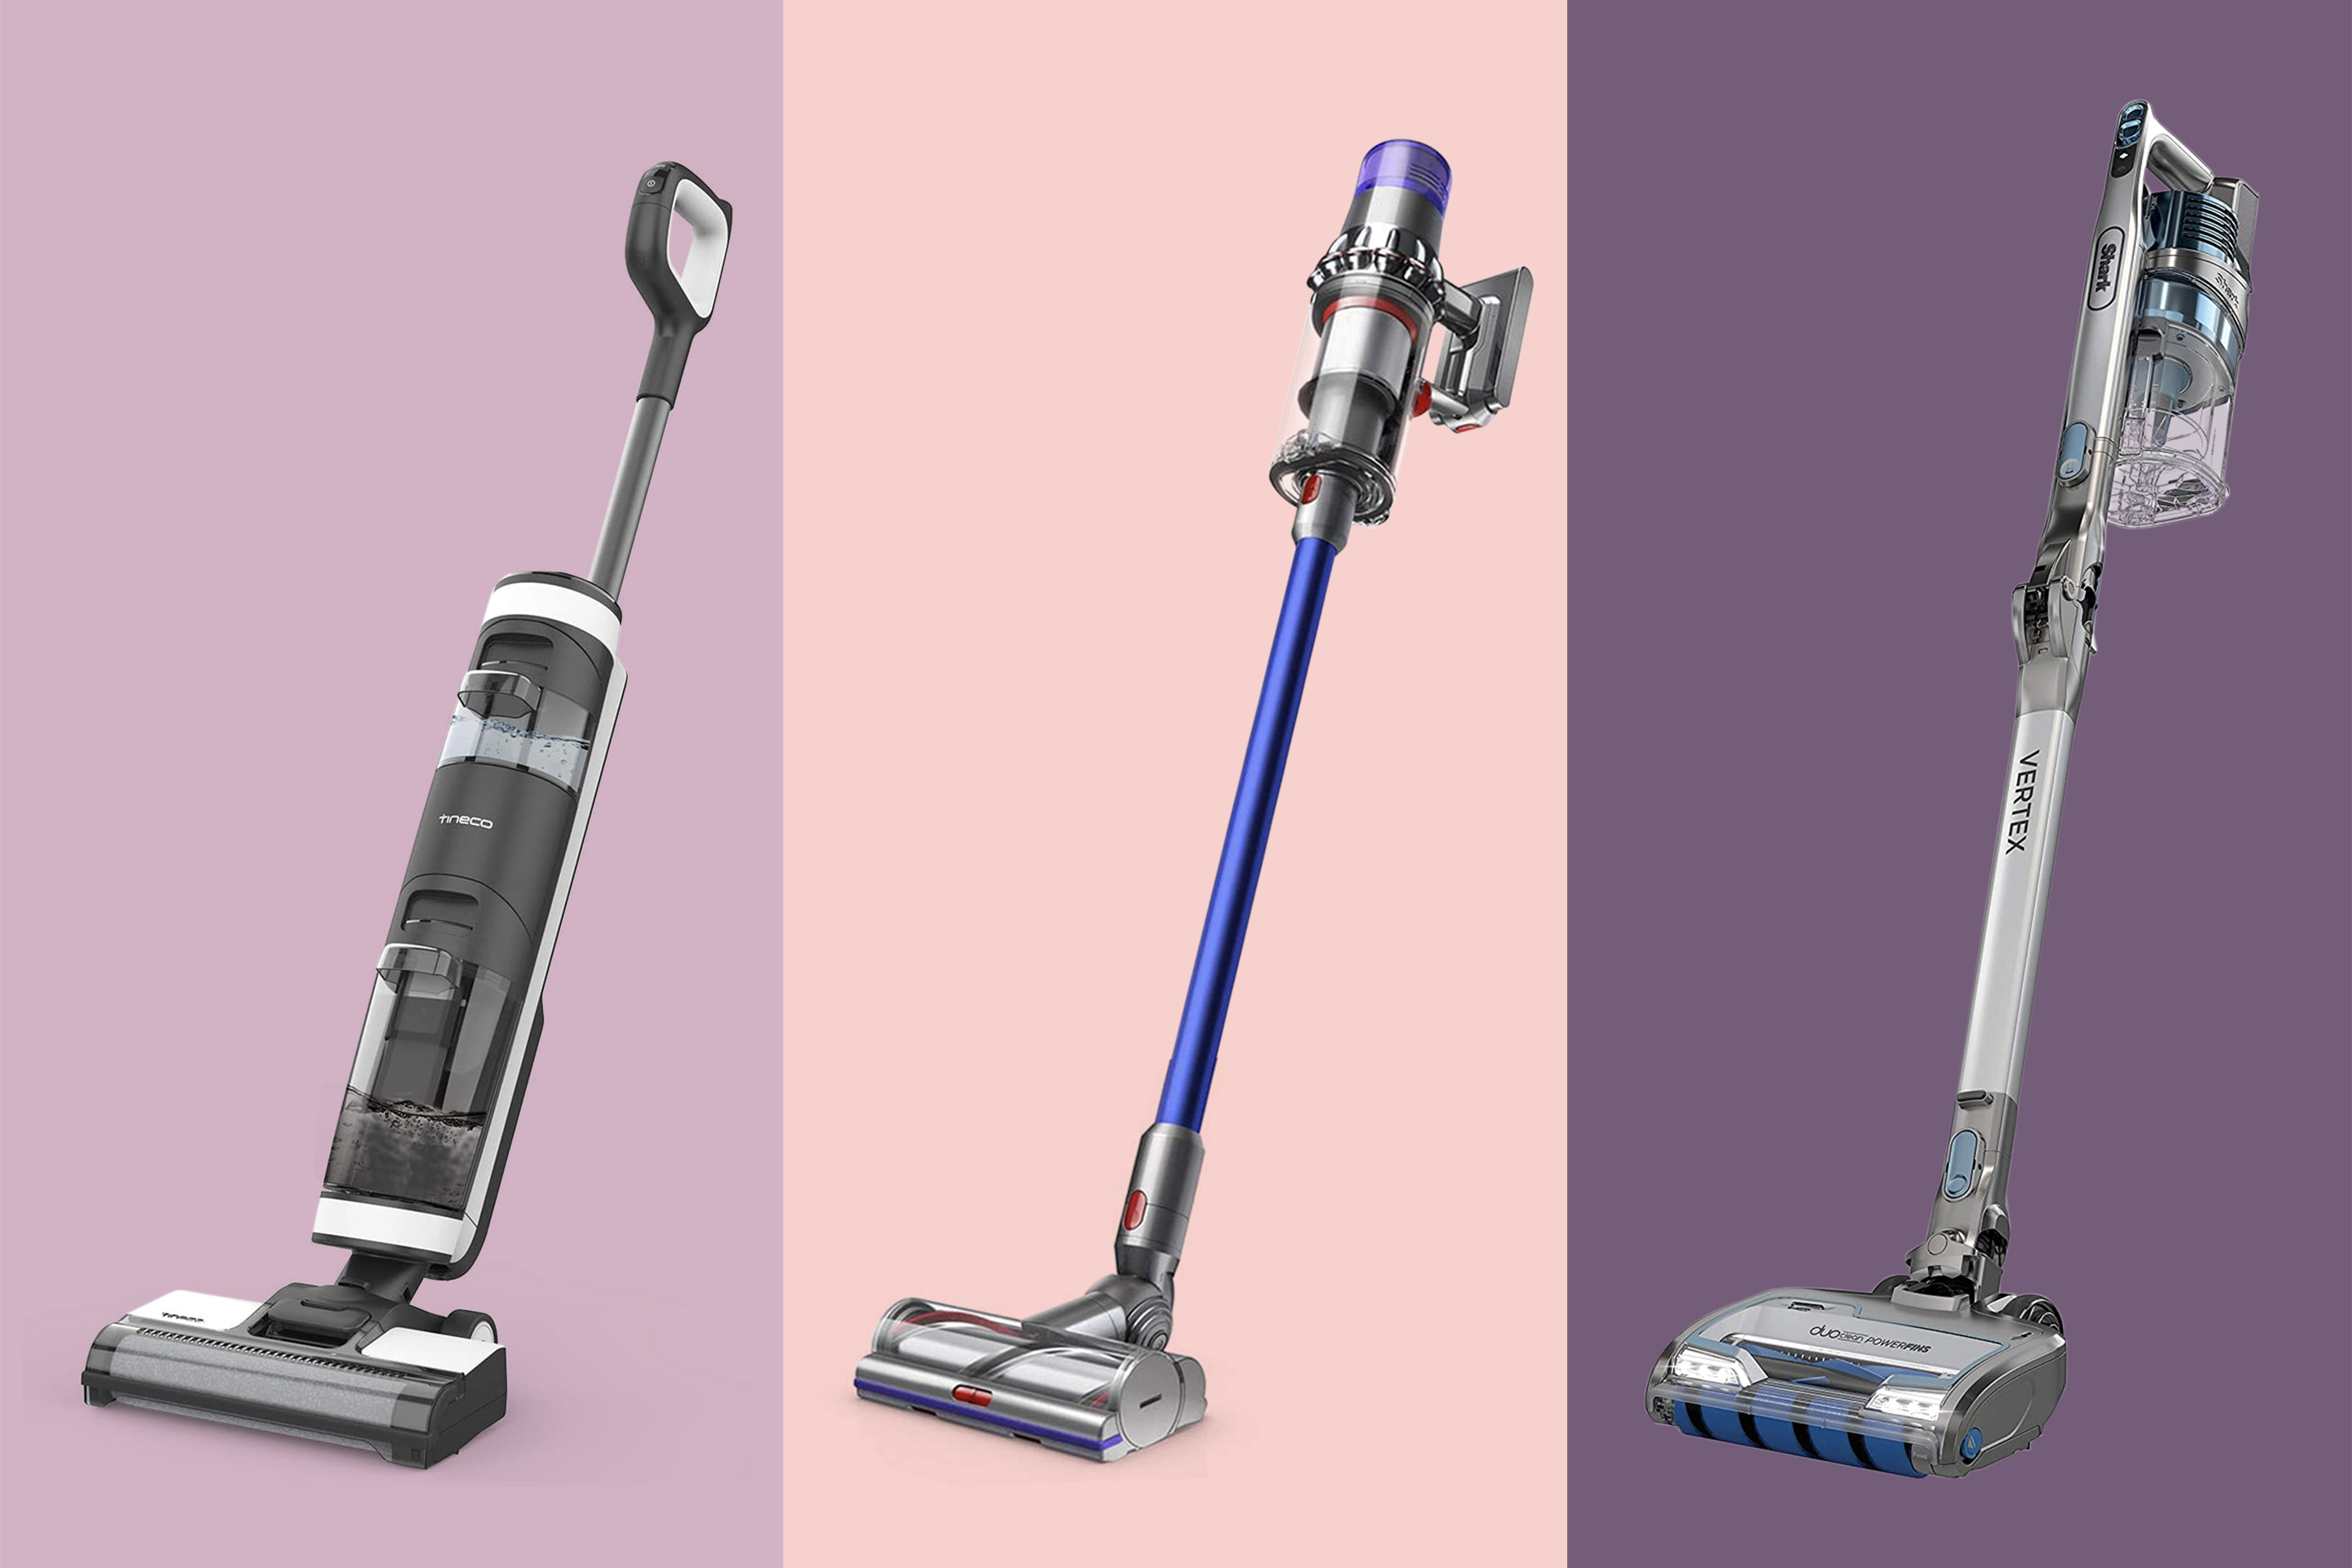 Best Cordless Vacuum Cleaner For 2021, Best Cordless Vacuum Cleaner For Tile Floors